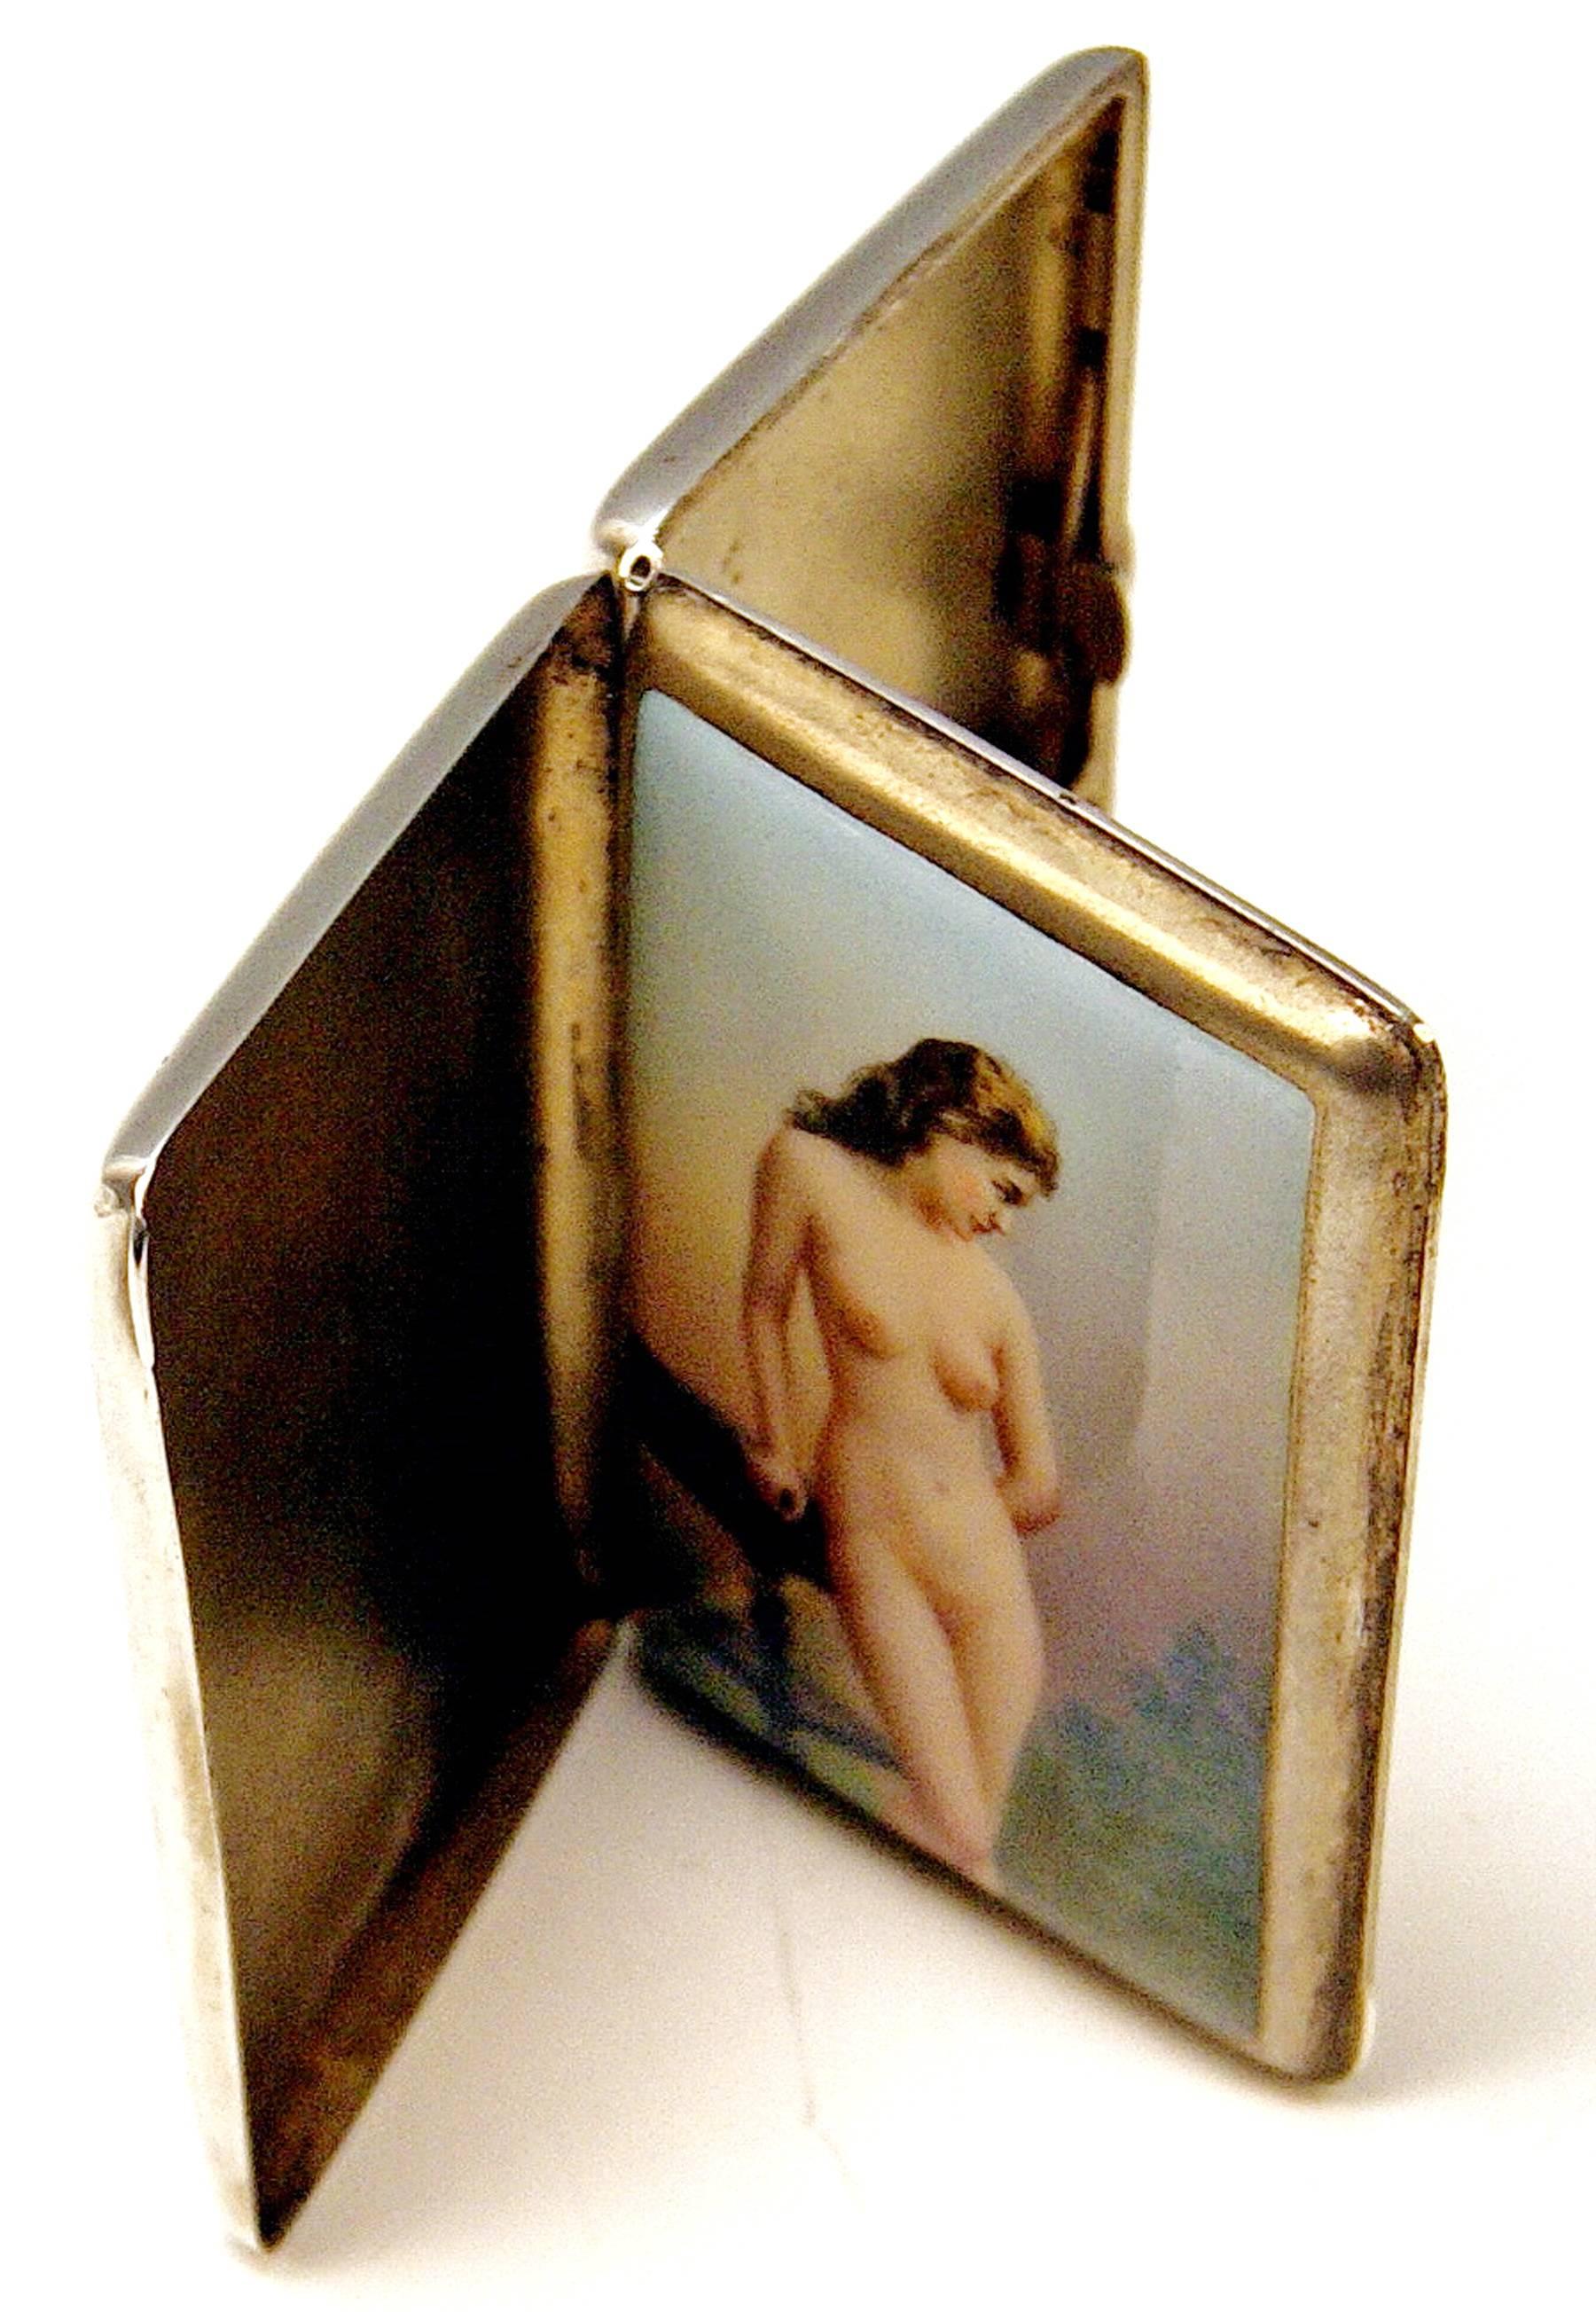 Very interesting silver 800 cigarette box or case with enamel painting covering inner lid: Lady nude.

The inner lid is decorated with stunning enamel picture - following scene is painted there: A handsome lady nude supports herself at table with